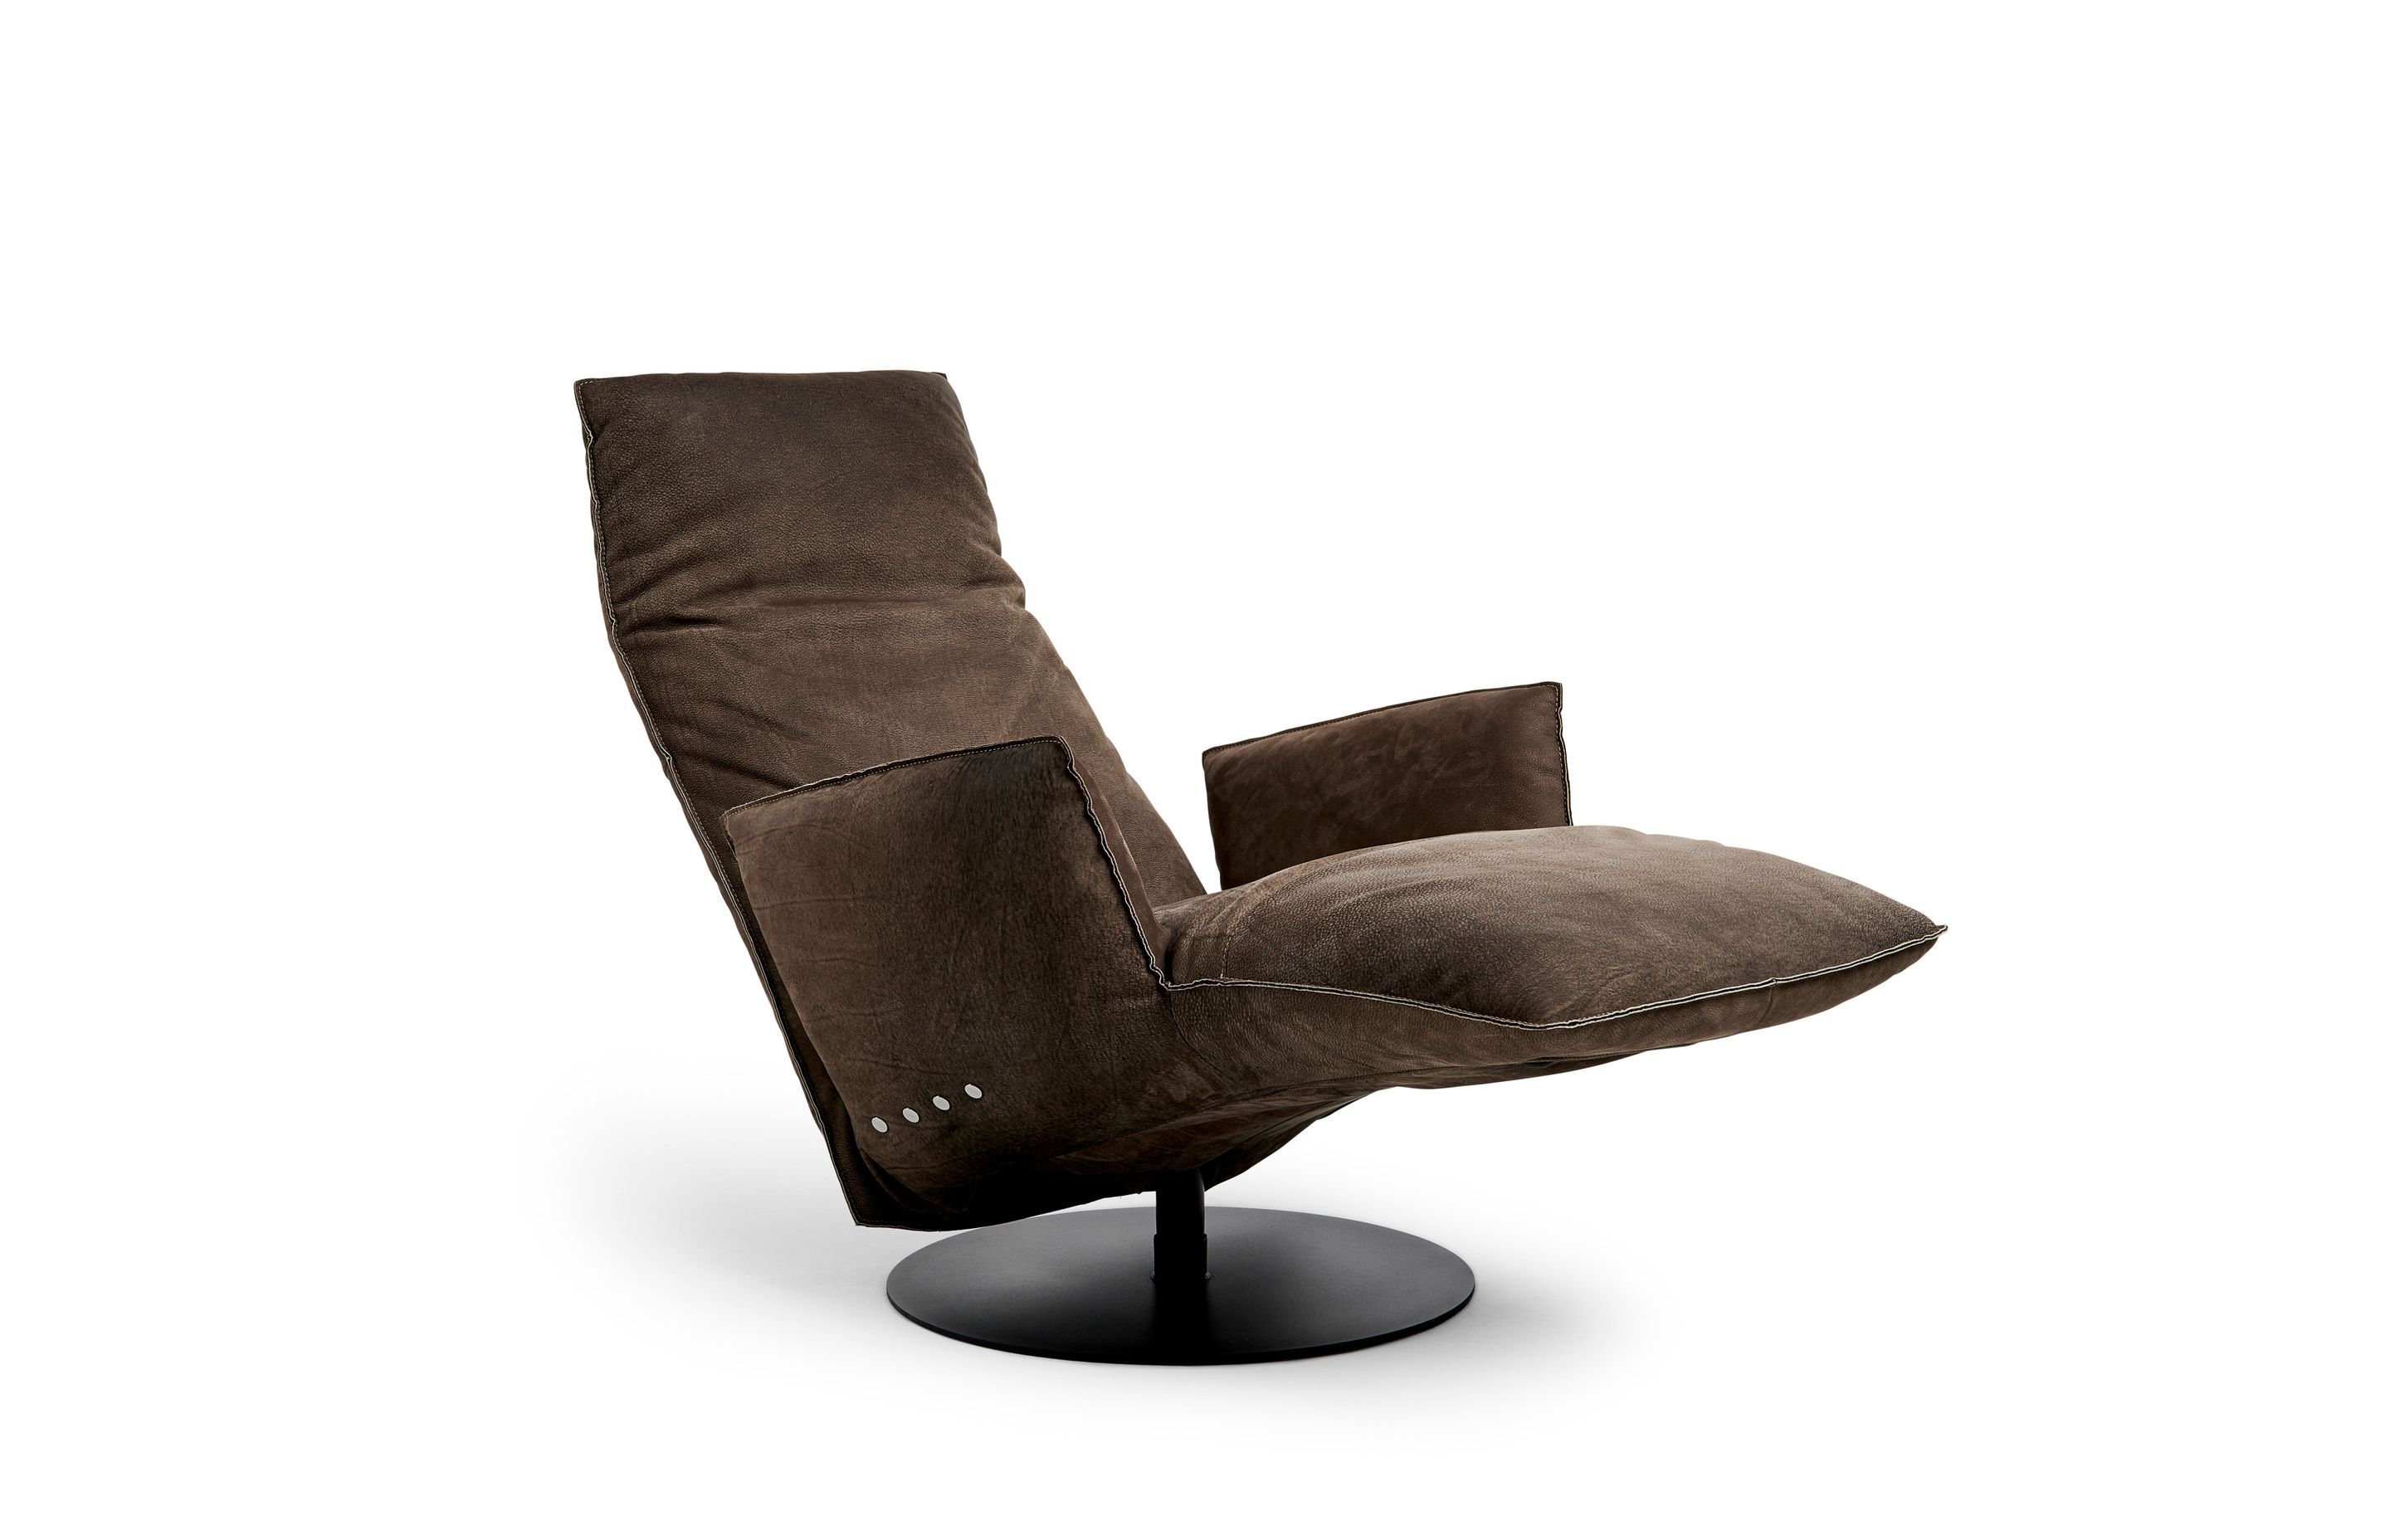 The fully reclining Baboo armchair is proving to be a popular model.